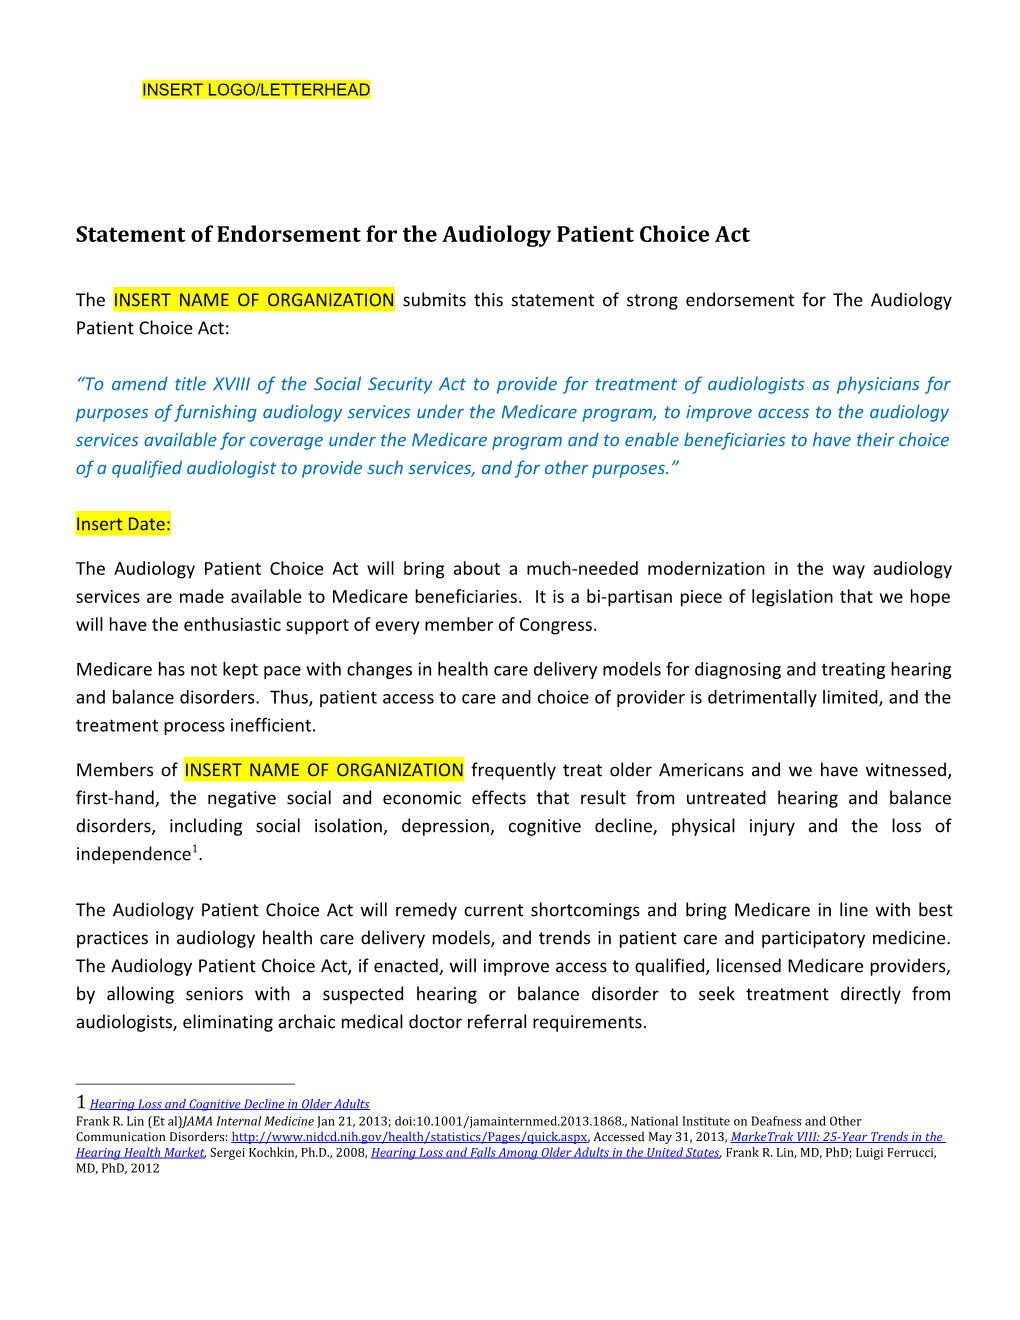 Statement of Endorsement for the Audiology Patient Choice Act